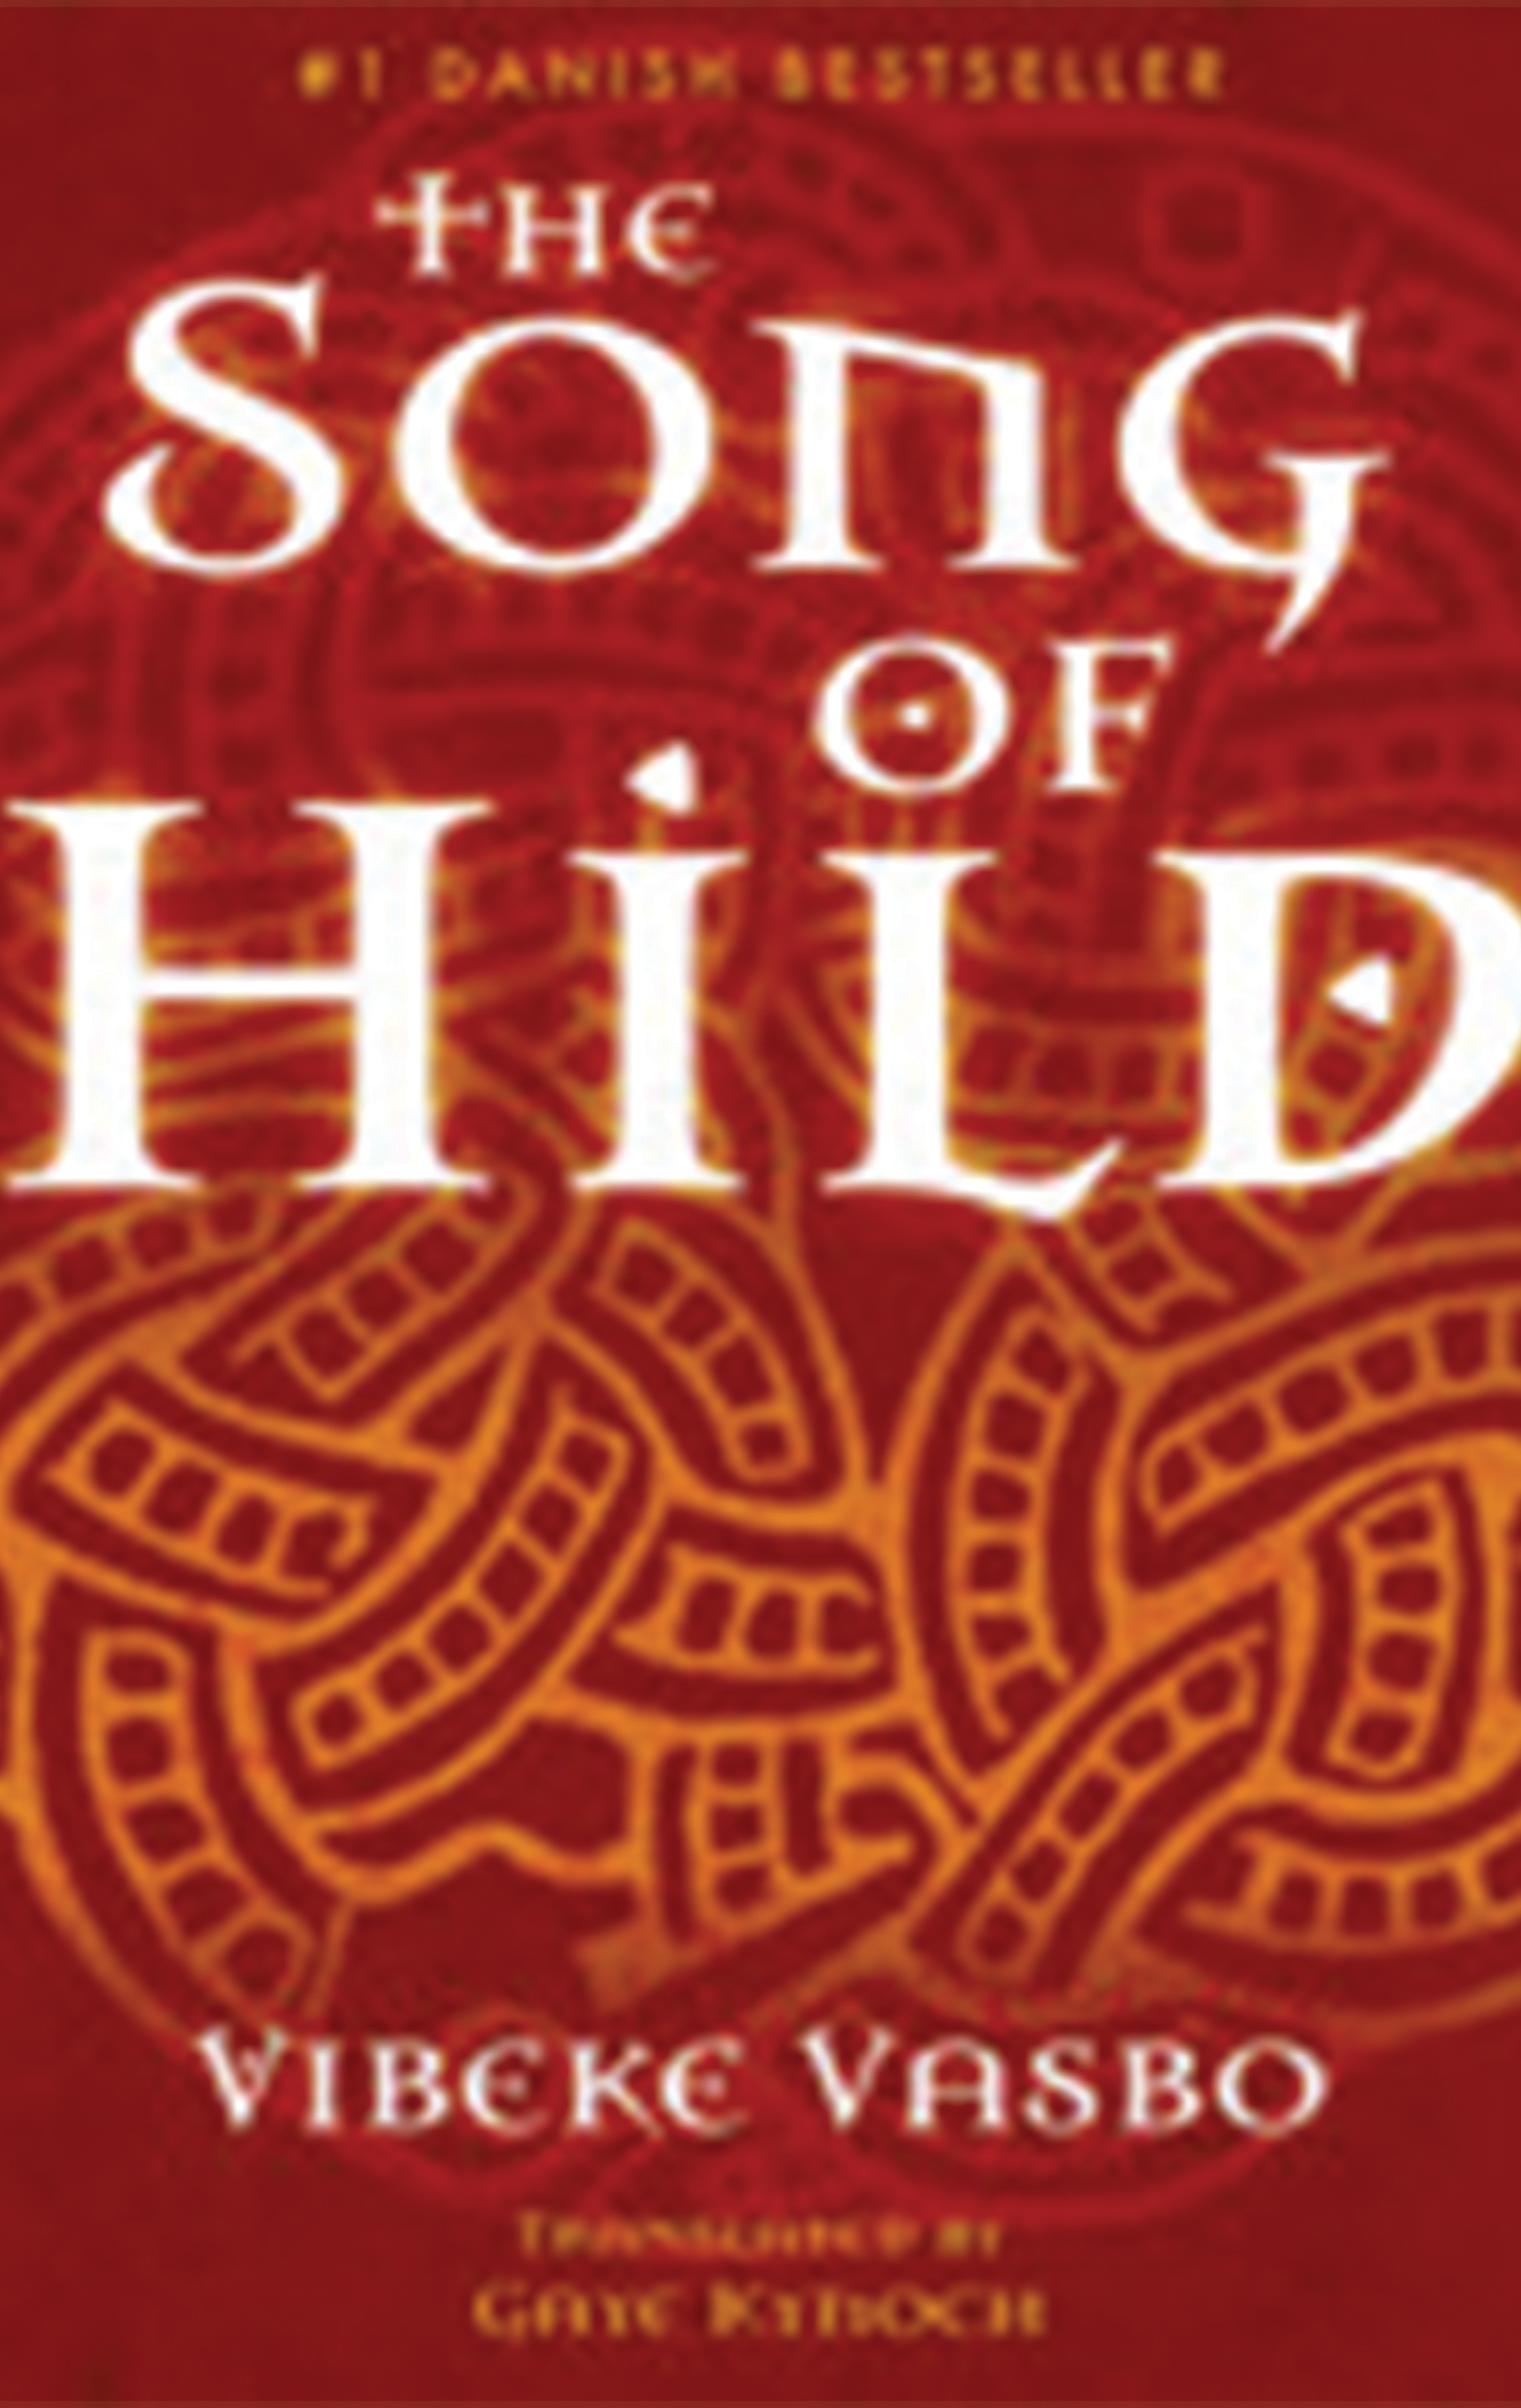 The Song of Hild